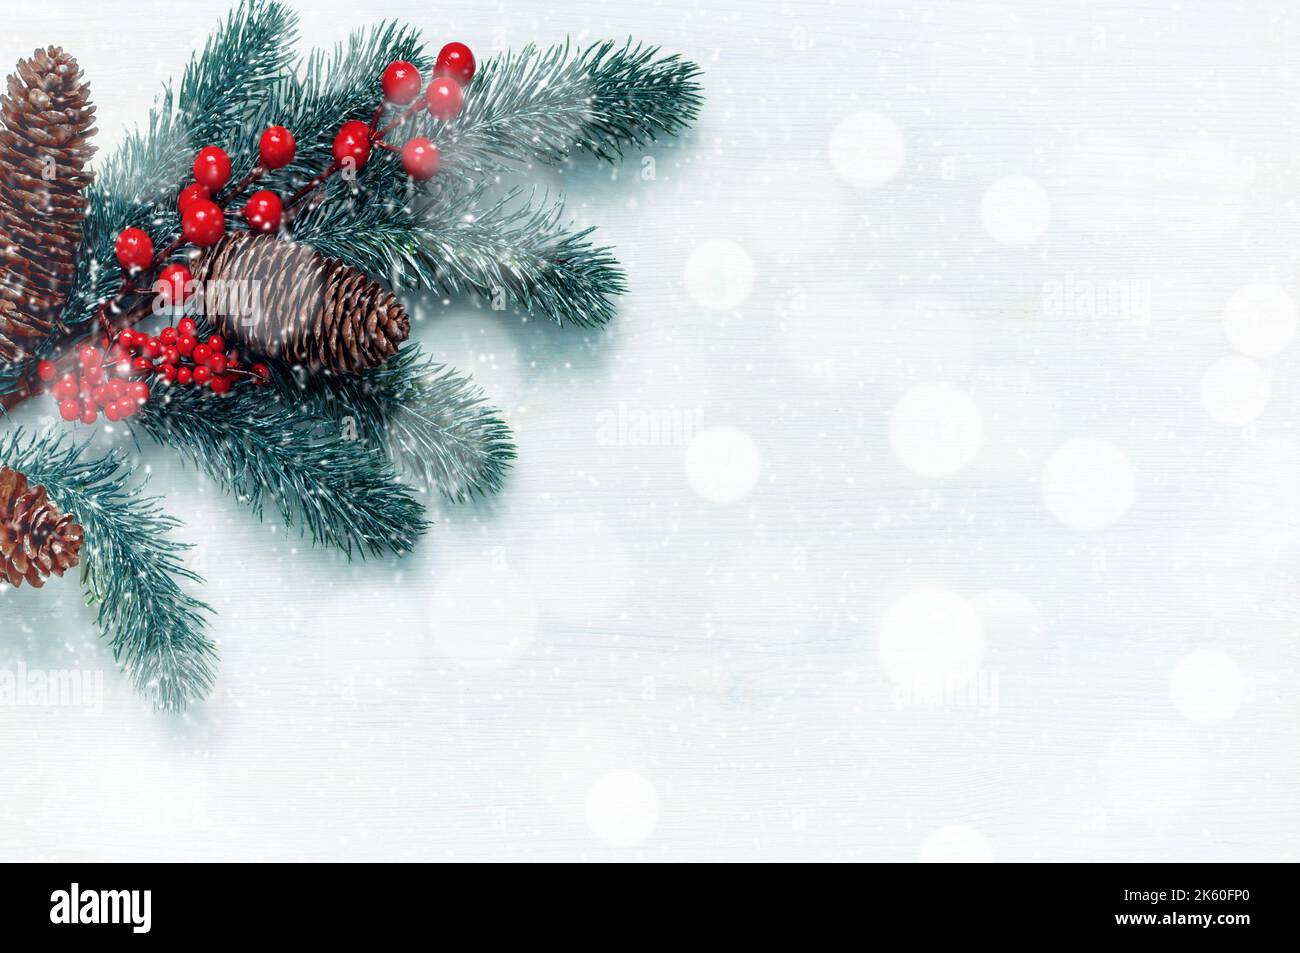 Christmas background. Fir tree branches with snowflakes on the white wooden background. Christmas festive still life, free space for Christmas text Stock Photo